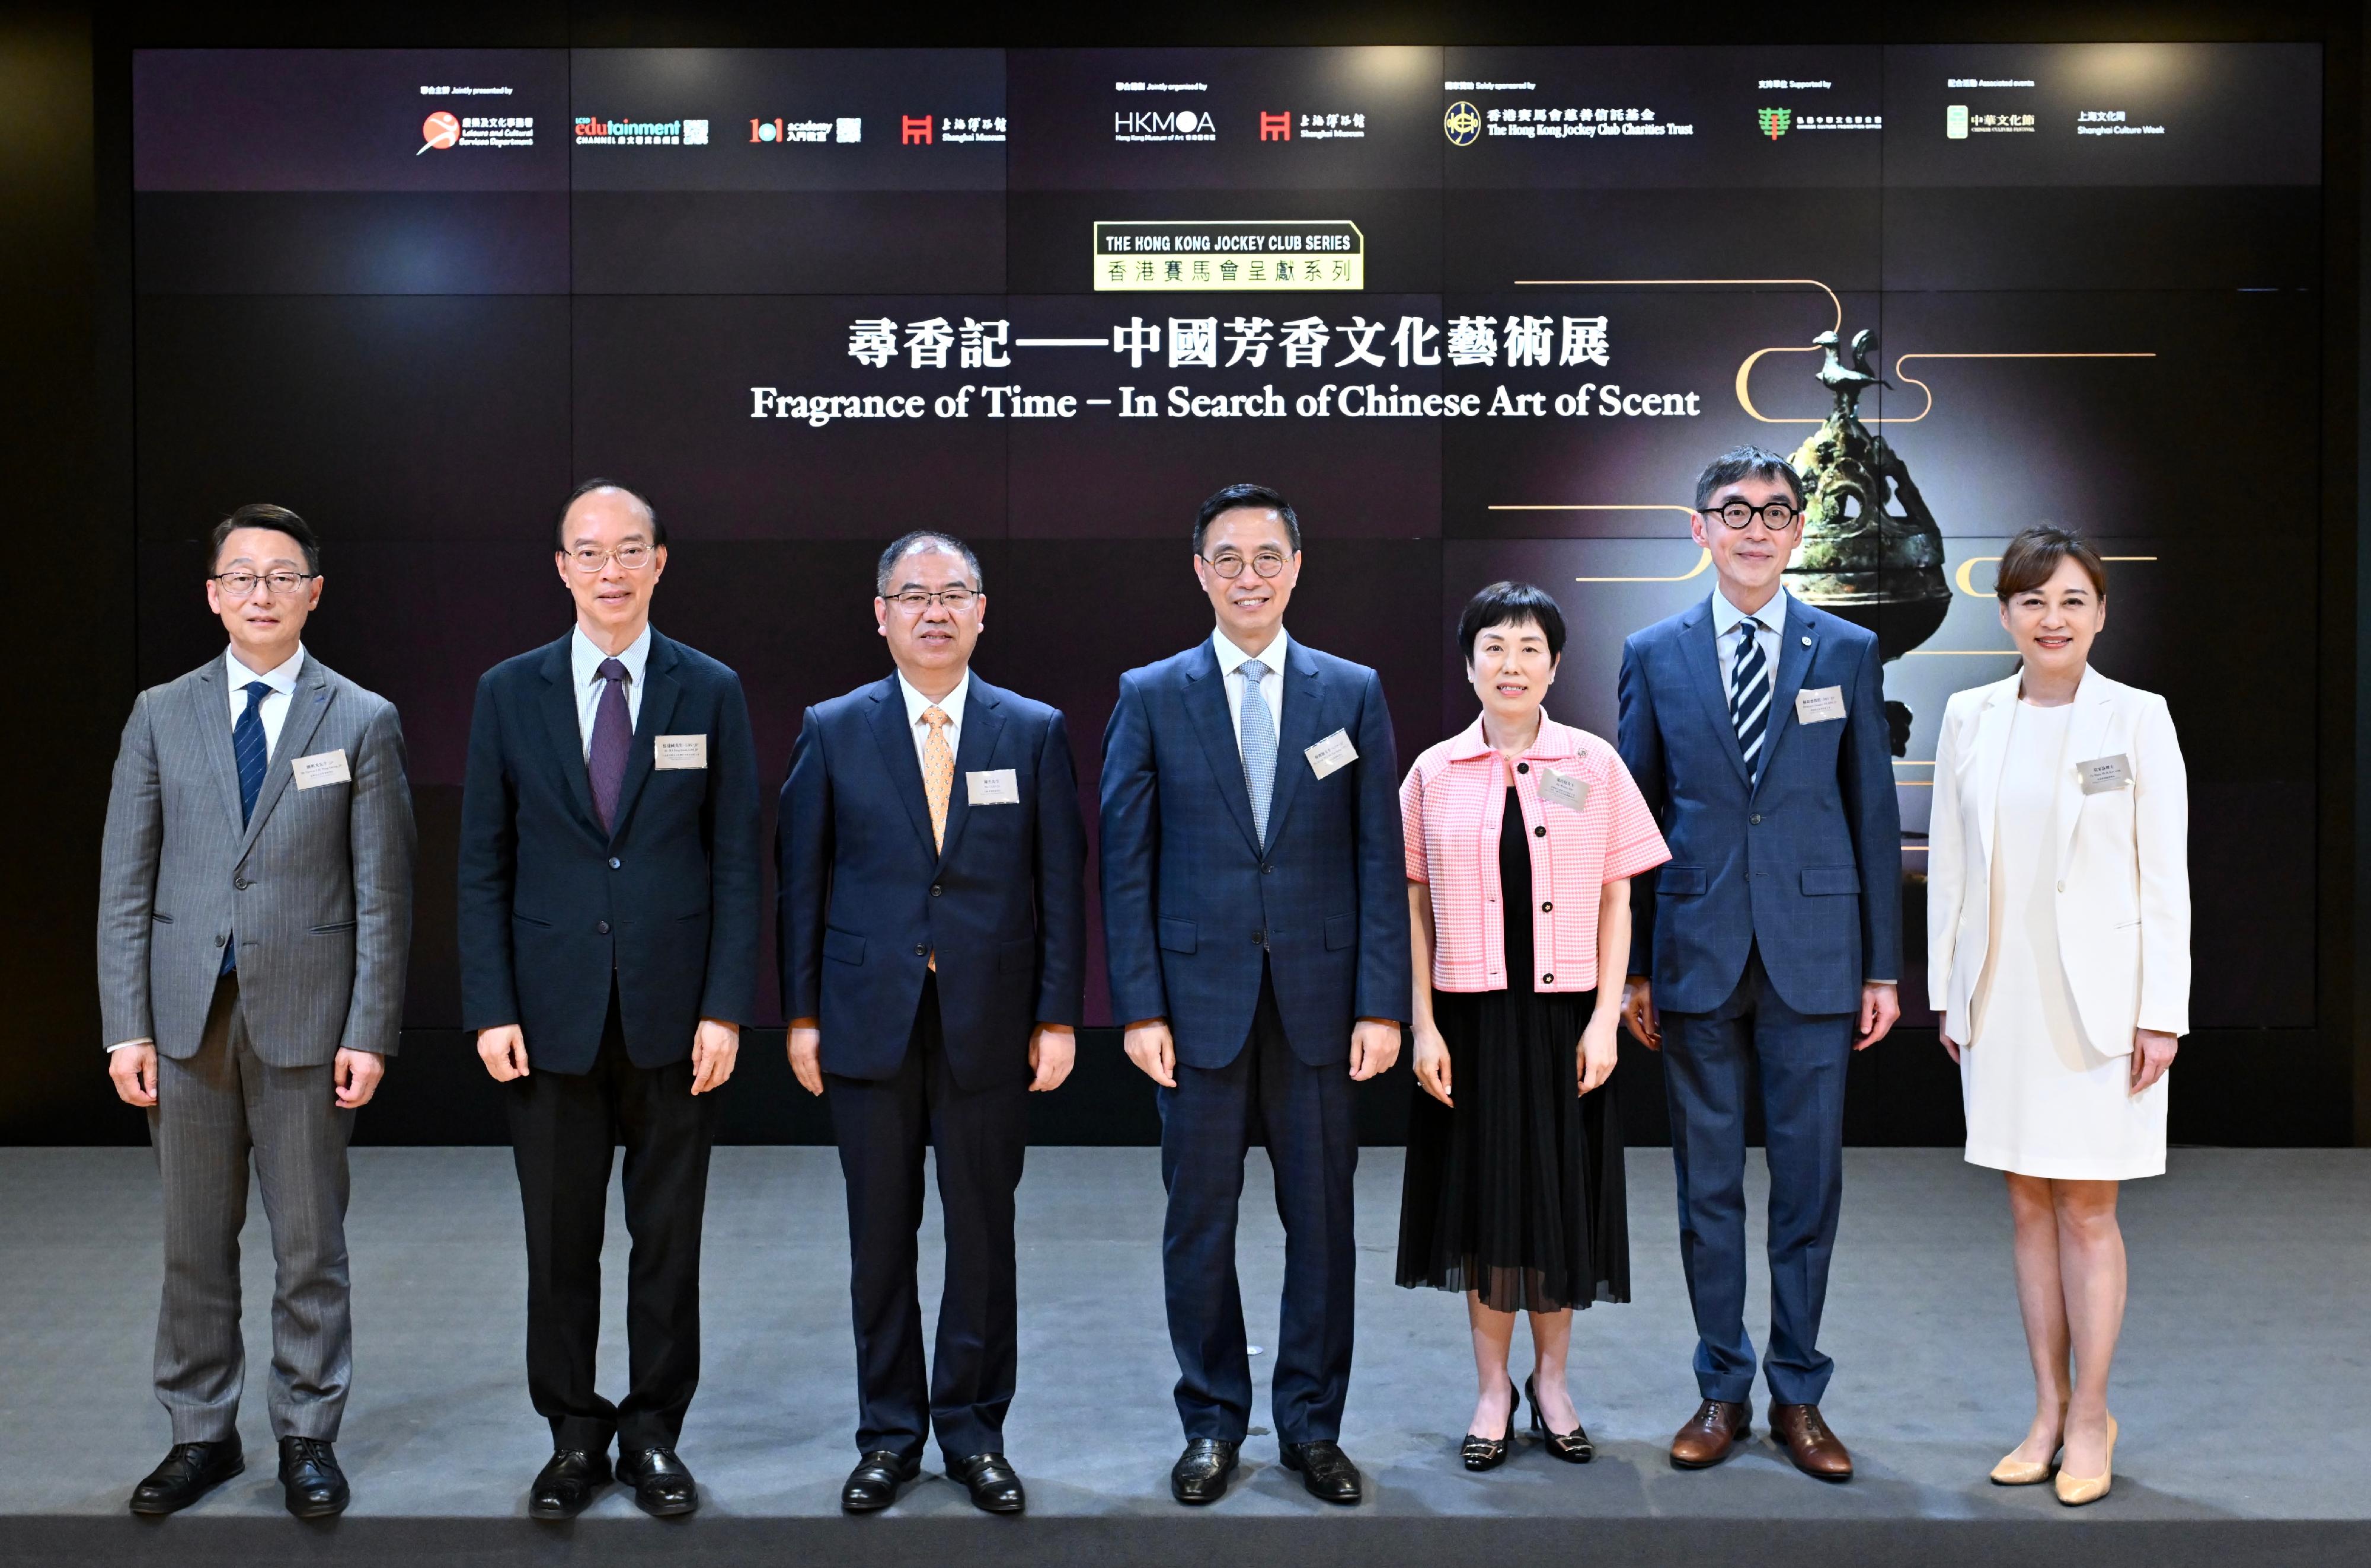 The opening ceremony of the "The Hong Kong Jockey Club Series: Fragrance of Time - In Search of Chinese Art of Scent" exhibition was held today (June 27) at the Hong Kong Museum of Art (HKMoA). Photo shows officiating guests (from left) the Director of Leisure and Cultural Services, Mr Vincent Liu; the Chairman of the Legislative Council Panel on Home Affairs, Culture and Sports, Mr Ma Fung-kwok; the Deputy Director of the Shanghai Museum, Mr Chen Jie; the Secretary for Culture, Sports and Tourism, Mr Kevin Yeung; the Head of Charities (Culture, Sports and Community Engagement) of the Hong Kong Jockey Club, Ms Winnie Yip; the Chairman of the Museum Advisory Committee, Professor Douglas So; and the Museum Director of the HKMoA, Dr Maria Mok, during the opening ceremony.